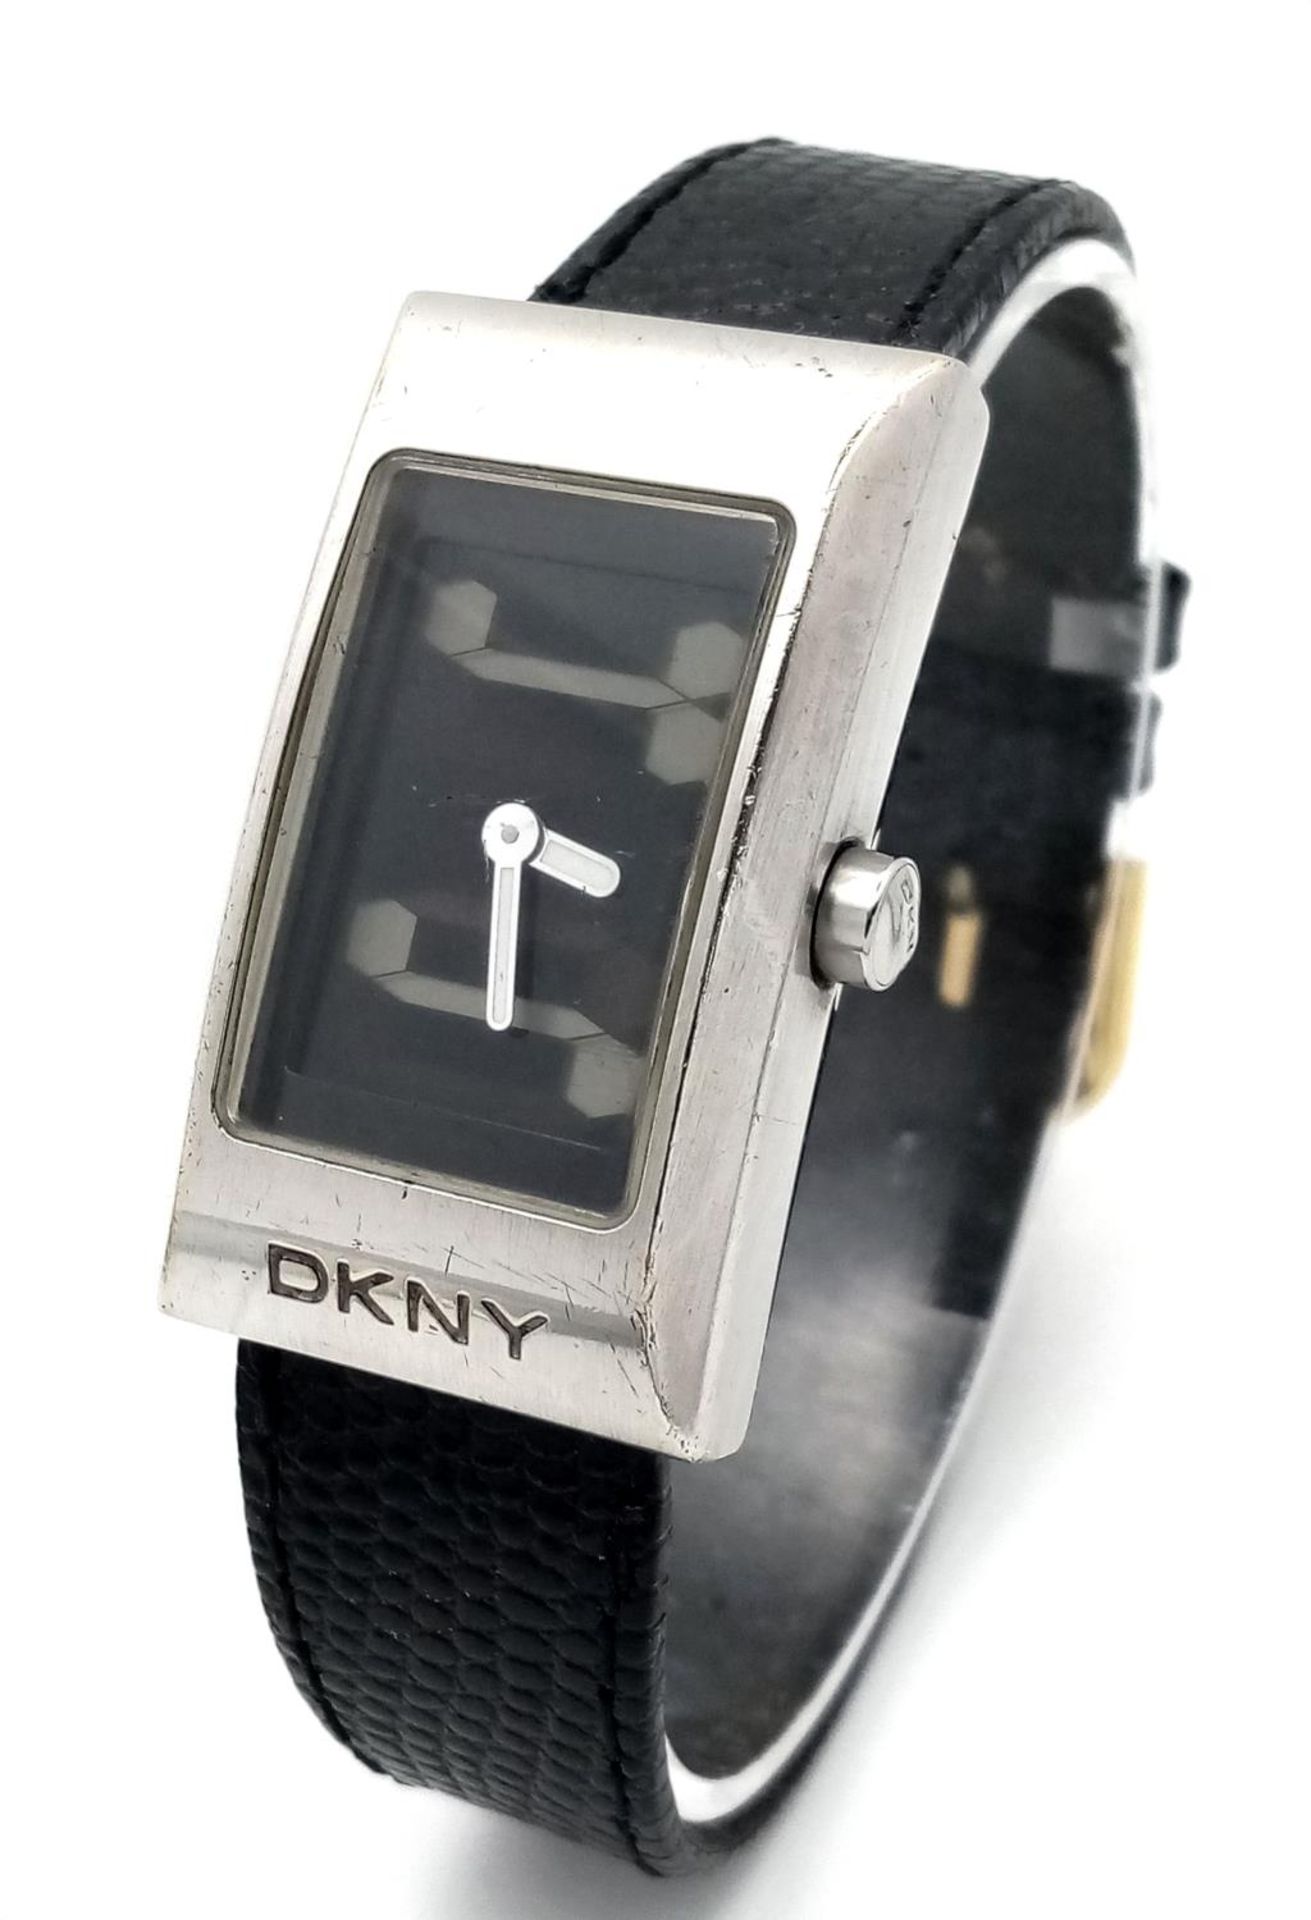 A DKNY Quartz Ladies Watch. Black leather strap. Stainless steel case - 24mm. Analogue/digital dial.